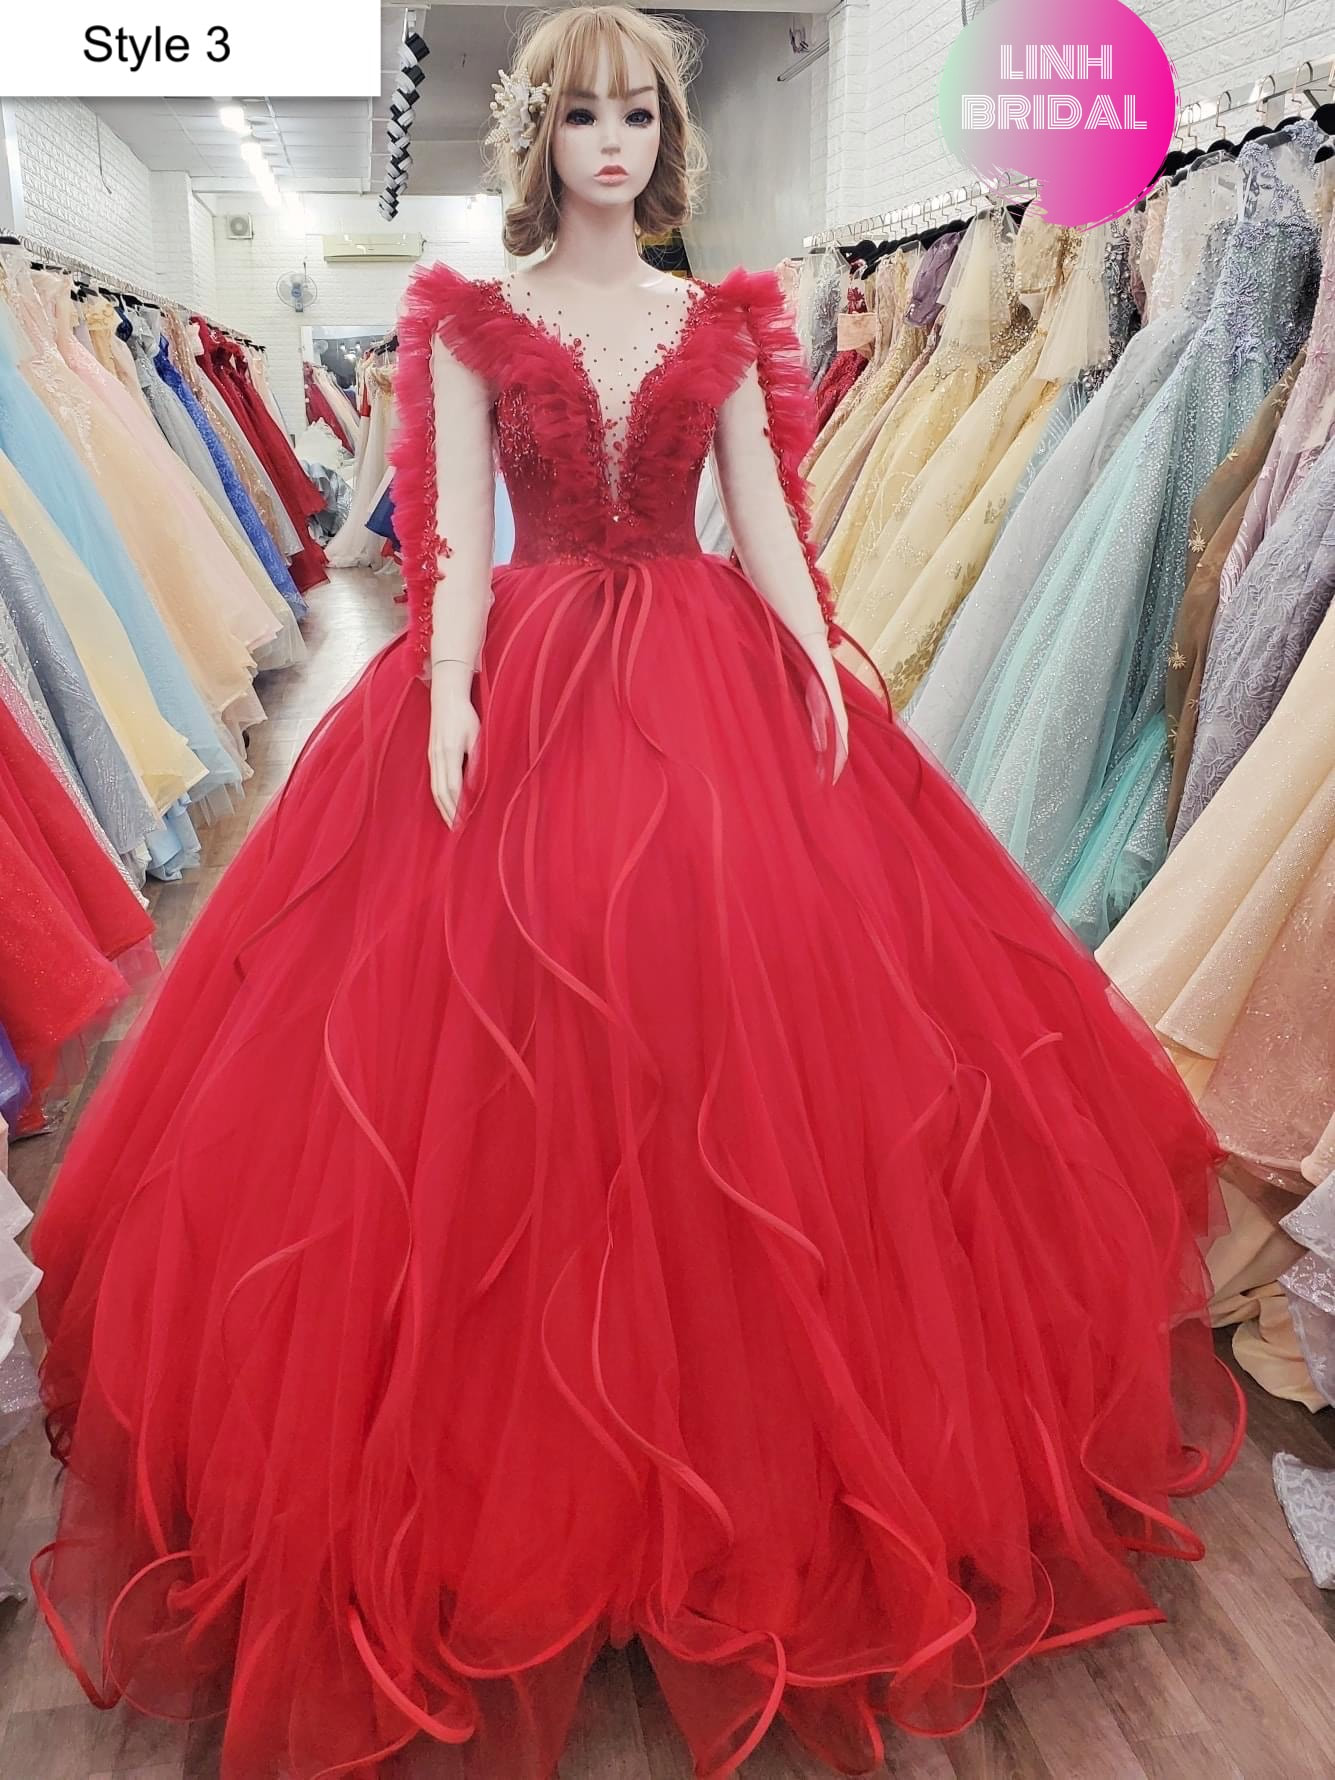 Beautiful Red Gown - Etsy